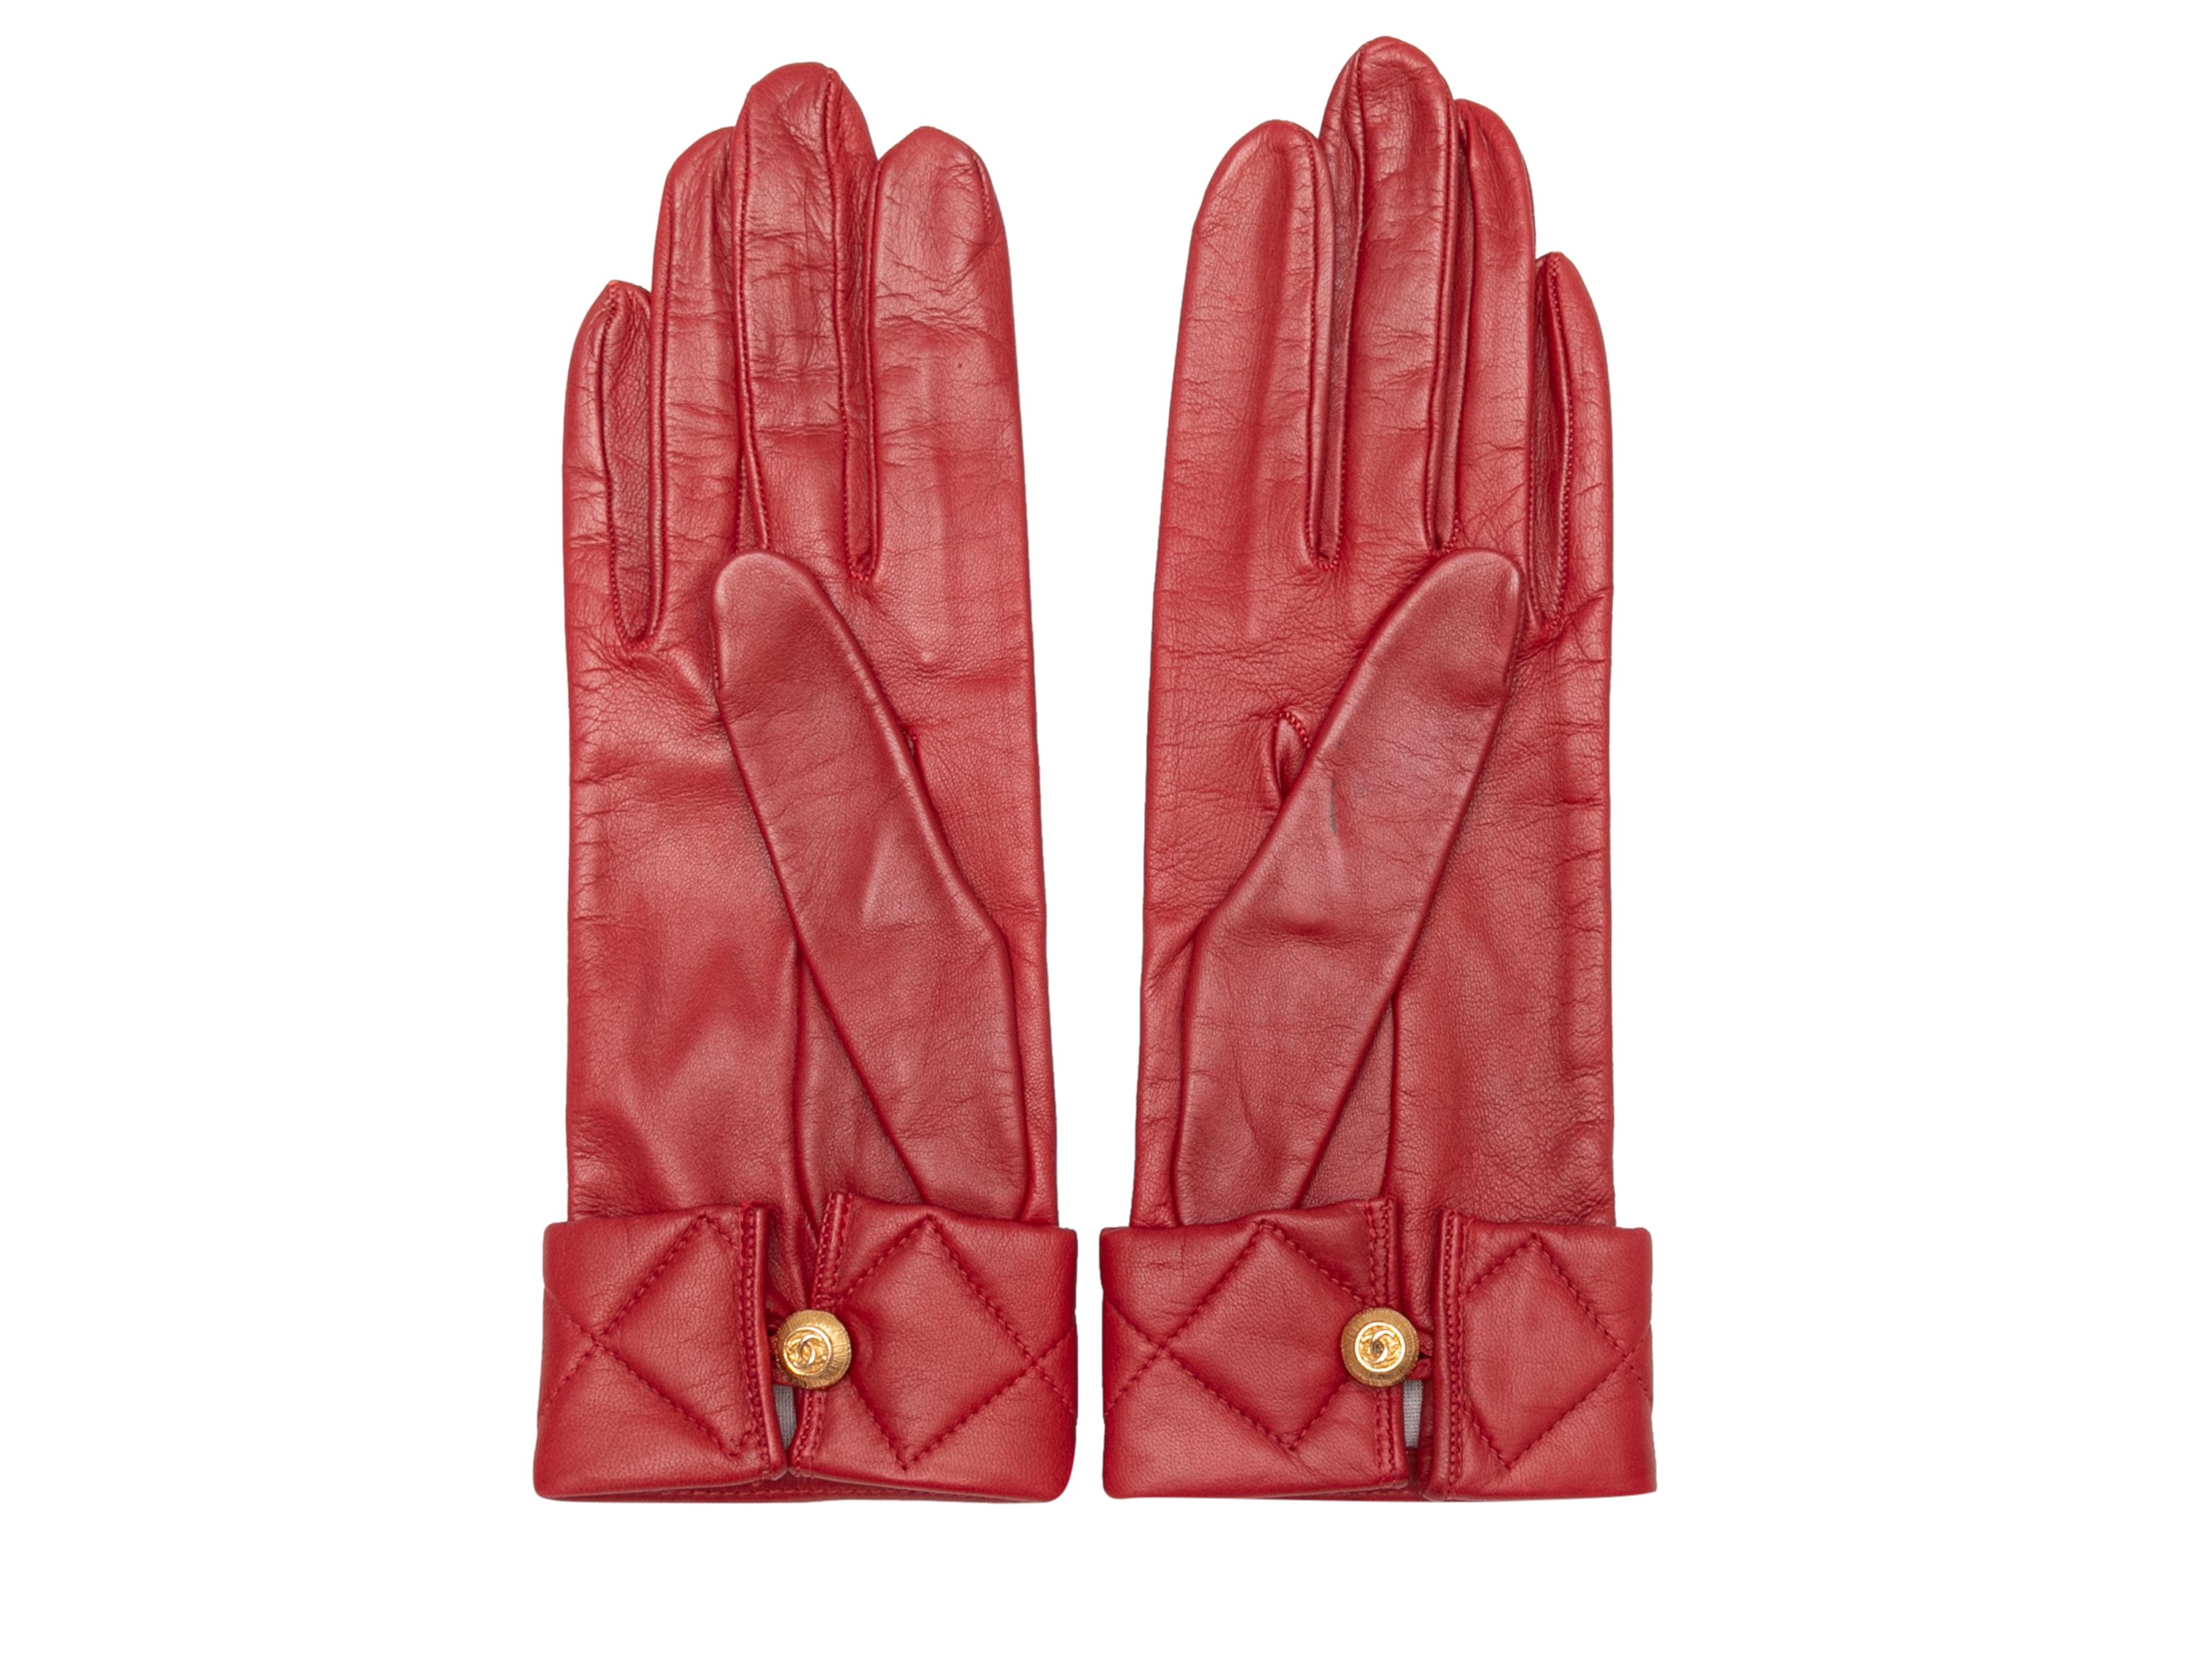 Vintage red leather gloves by Chanel. Quilted cuffs. Gold-tone button closures at wrists. 3.25